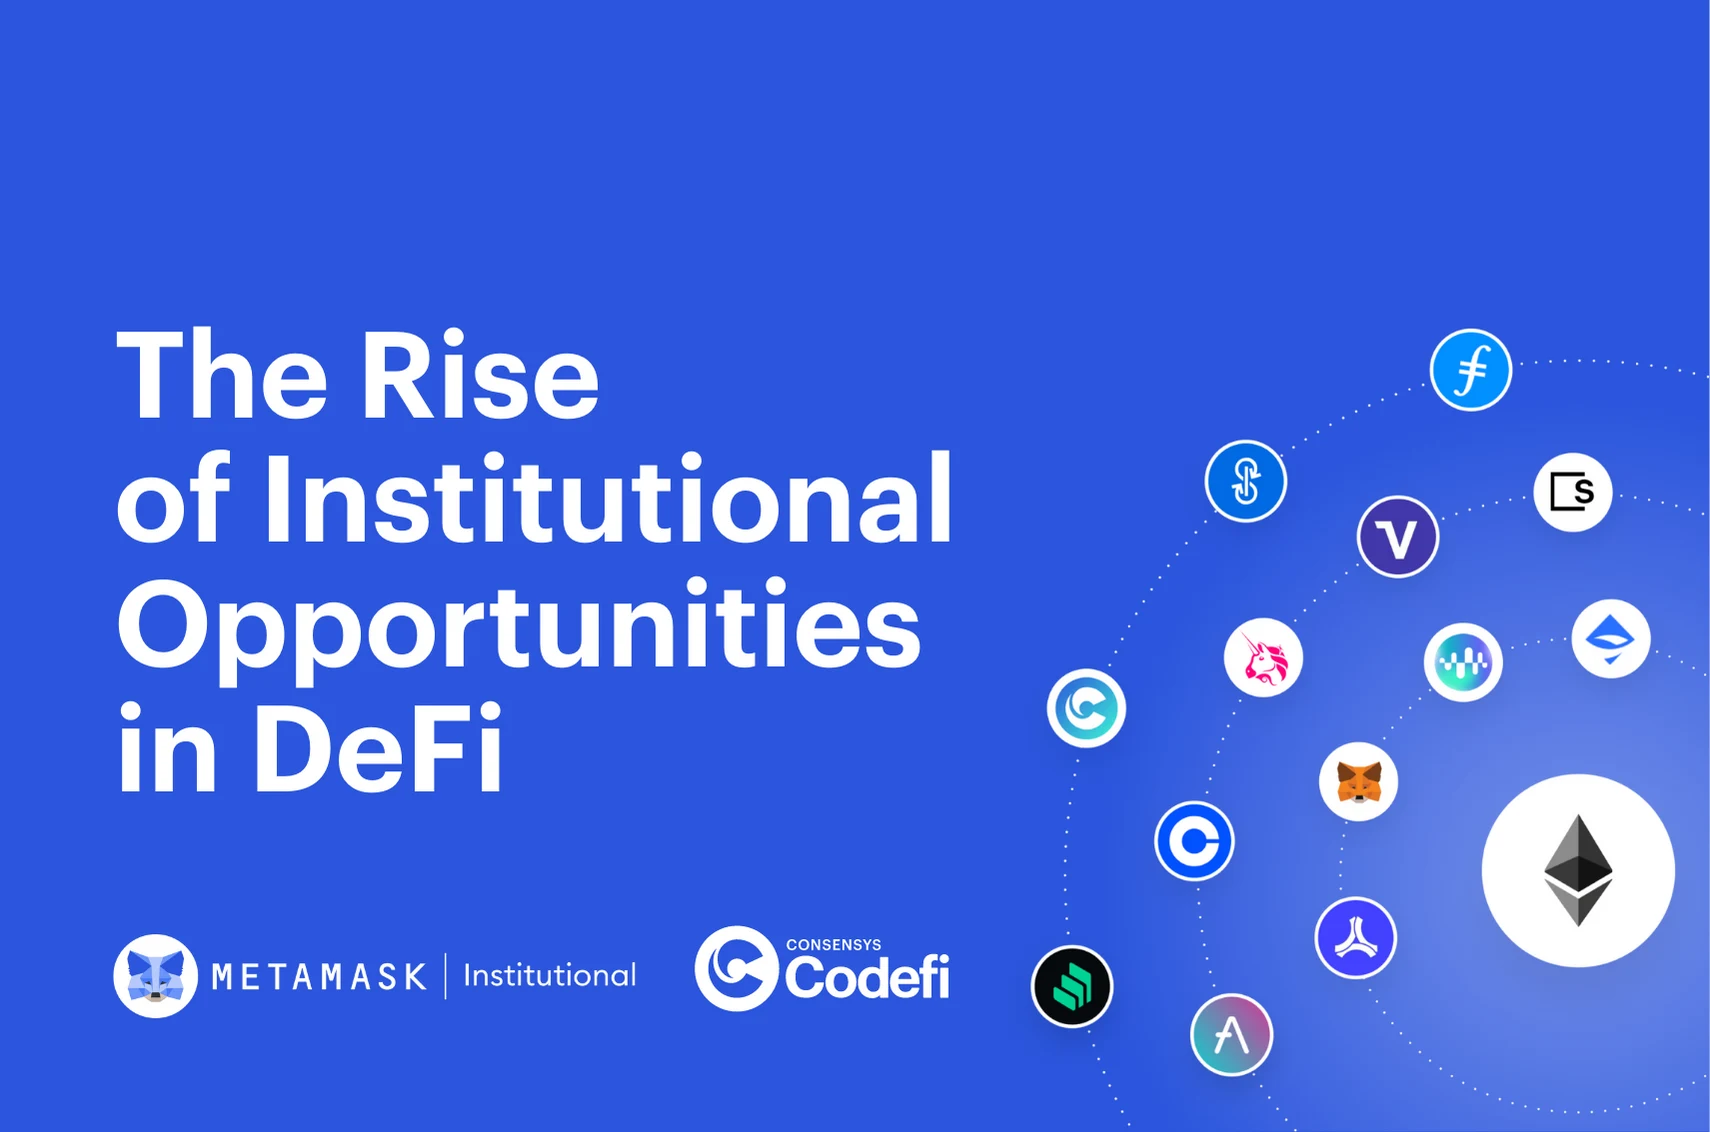 Image: The Rise of Institutional Opportunities in DeFi